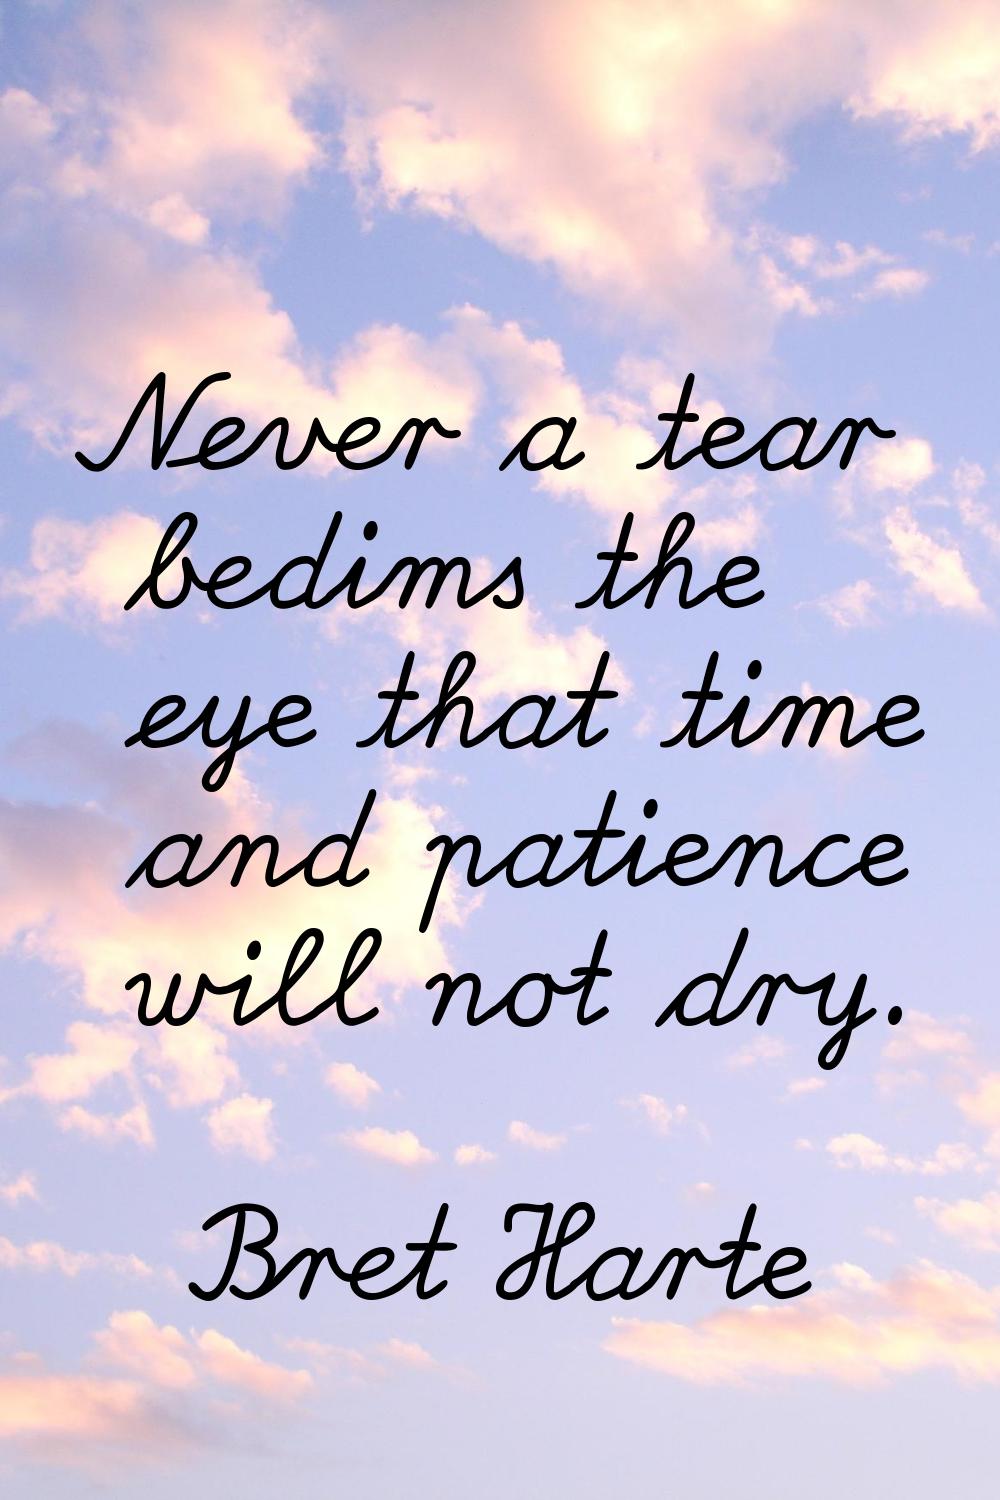 Never a tear bedims the eye that time and patience will not dry.